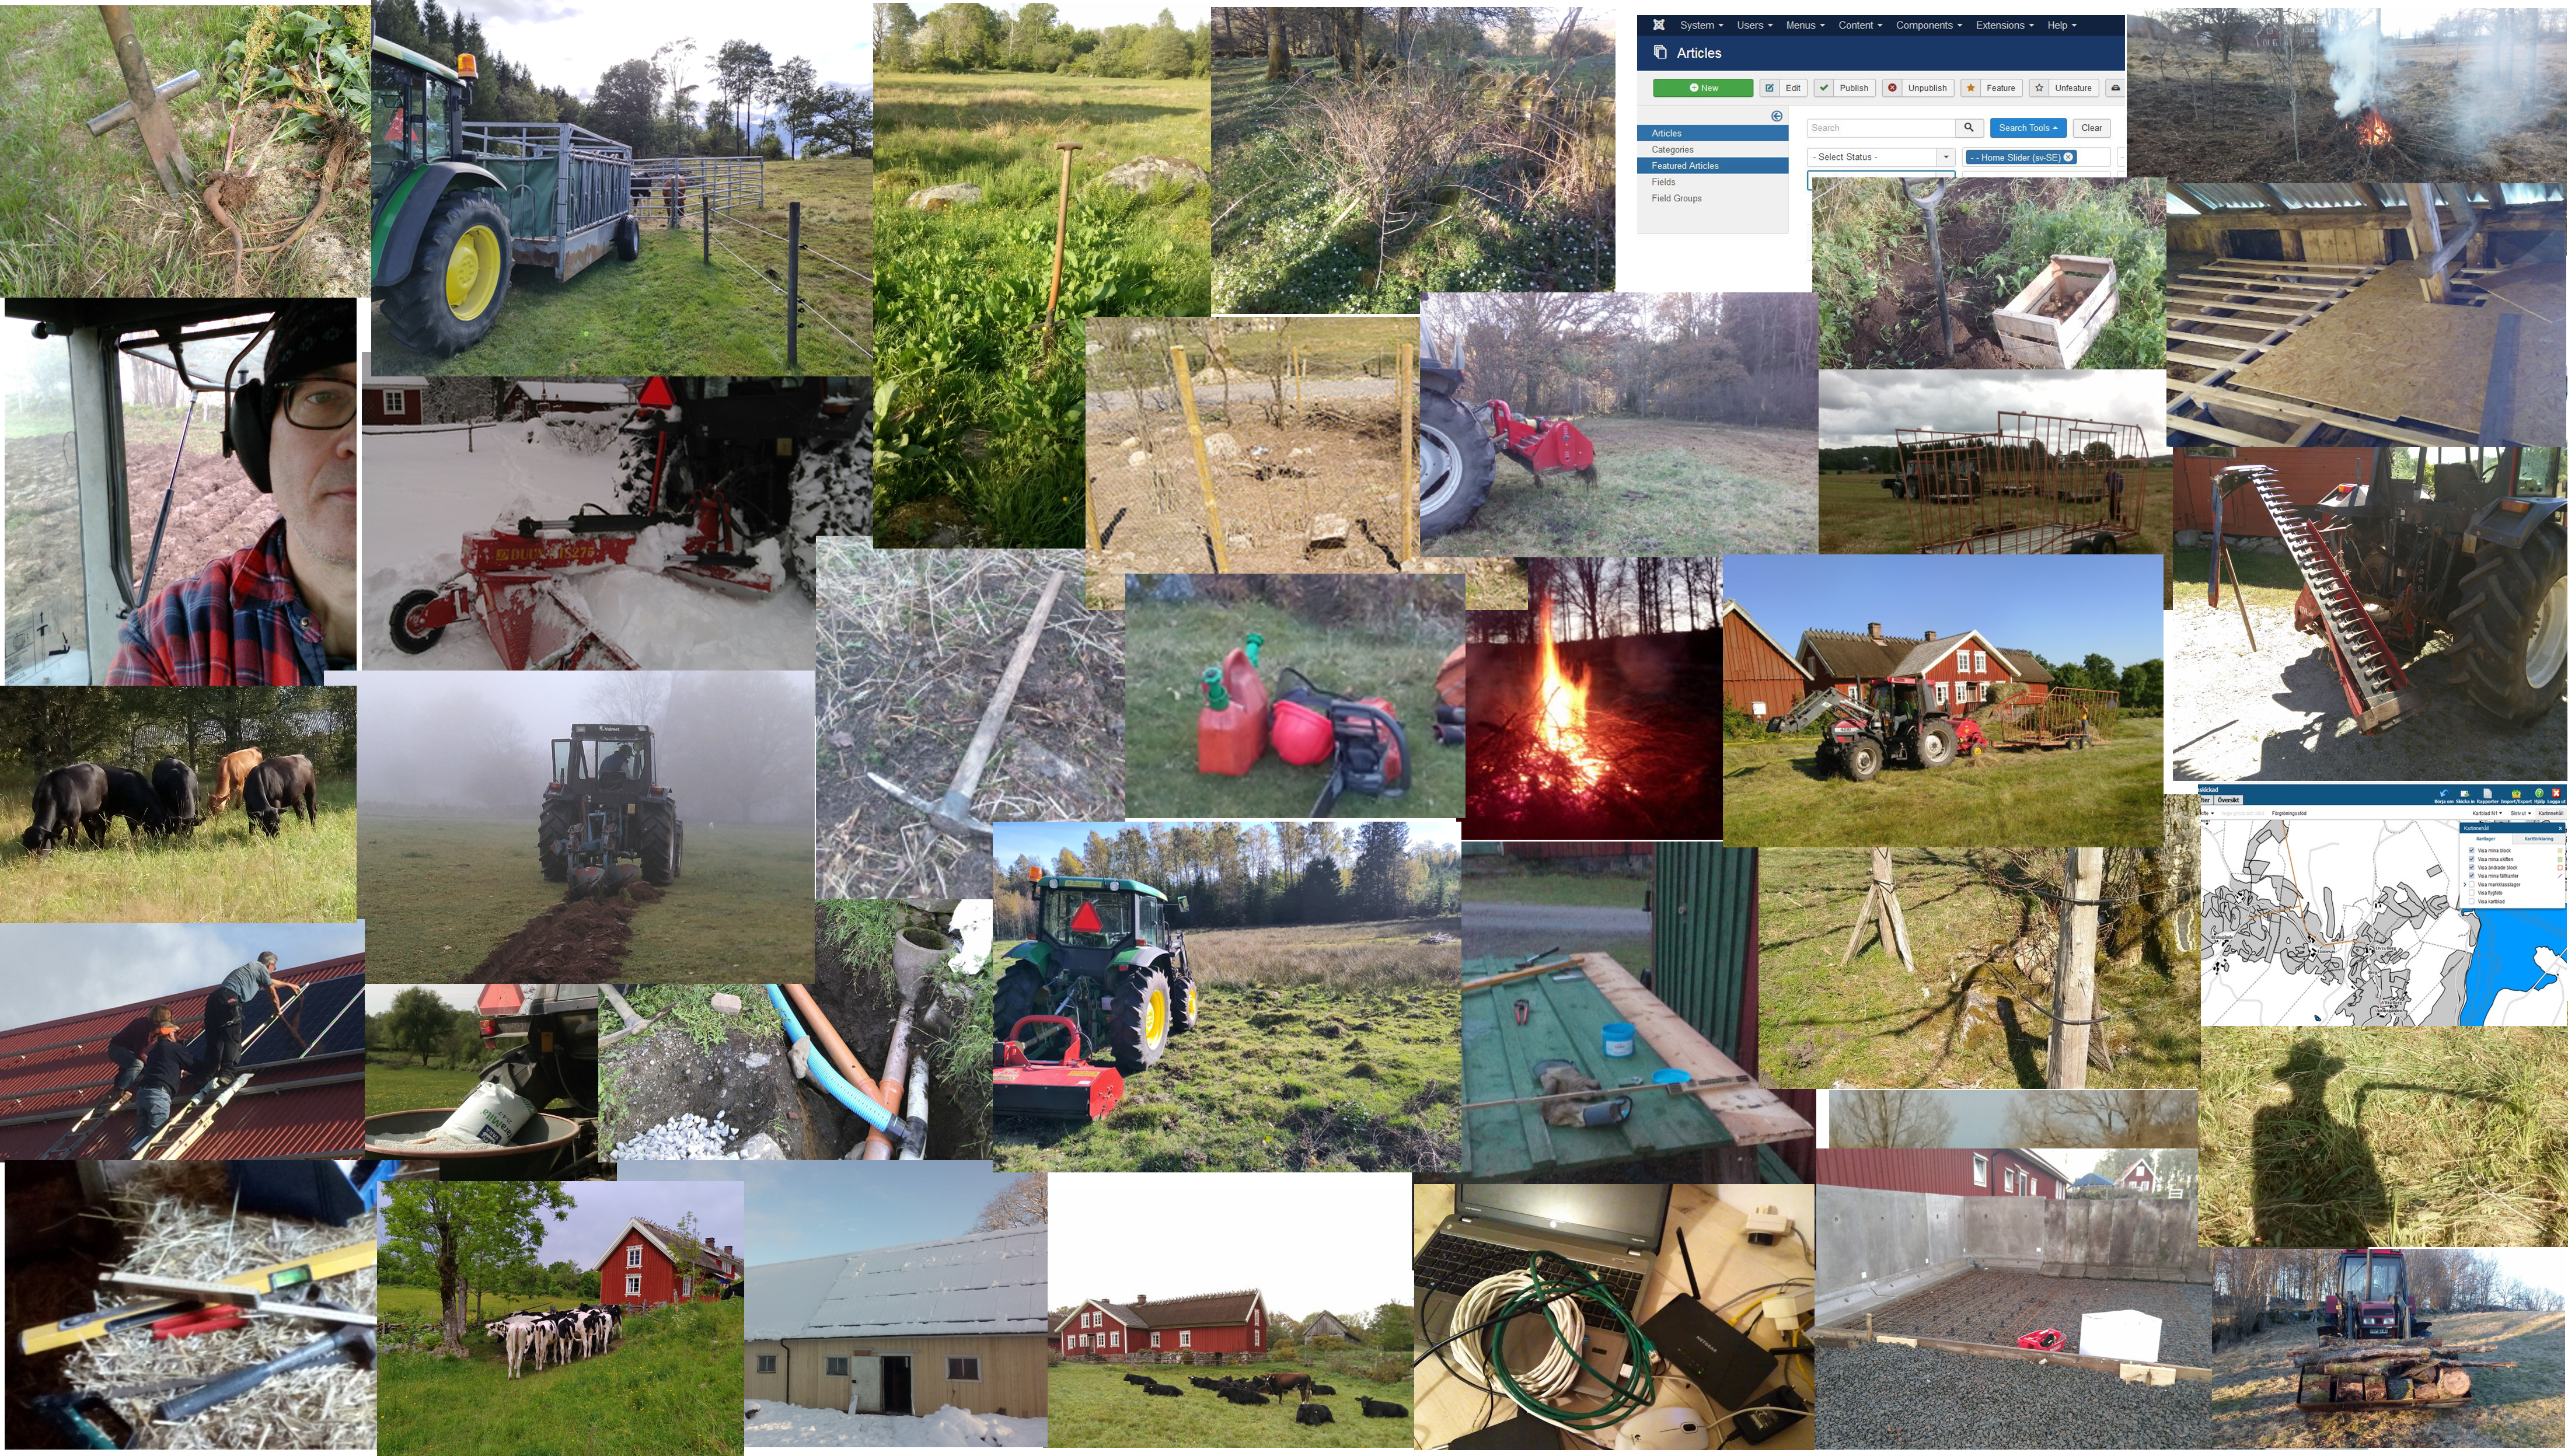 The picture shows various activities that a farmer carries out. 